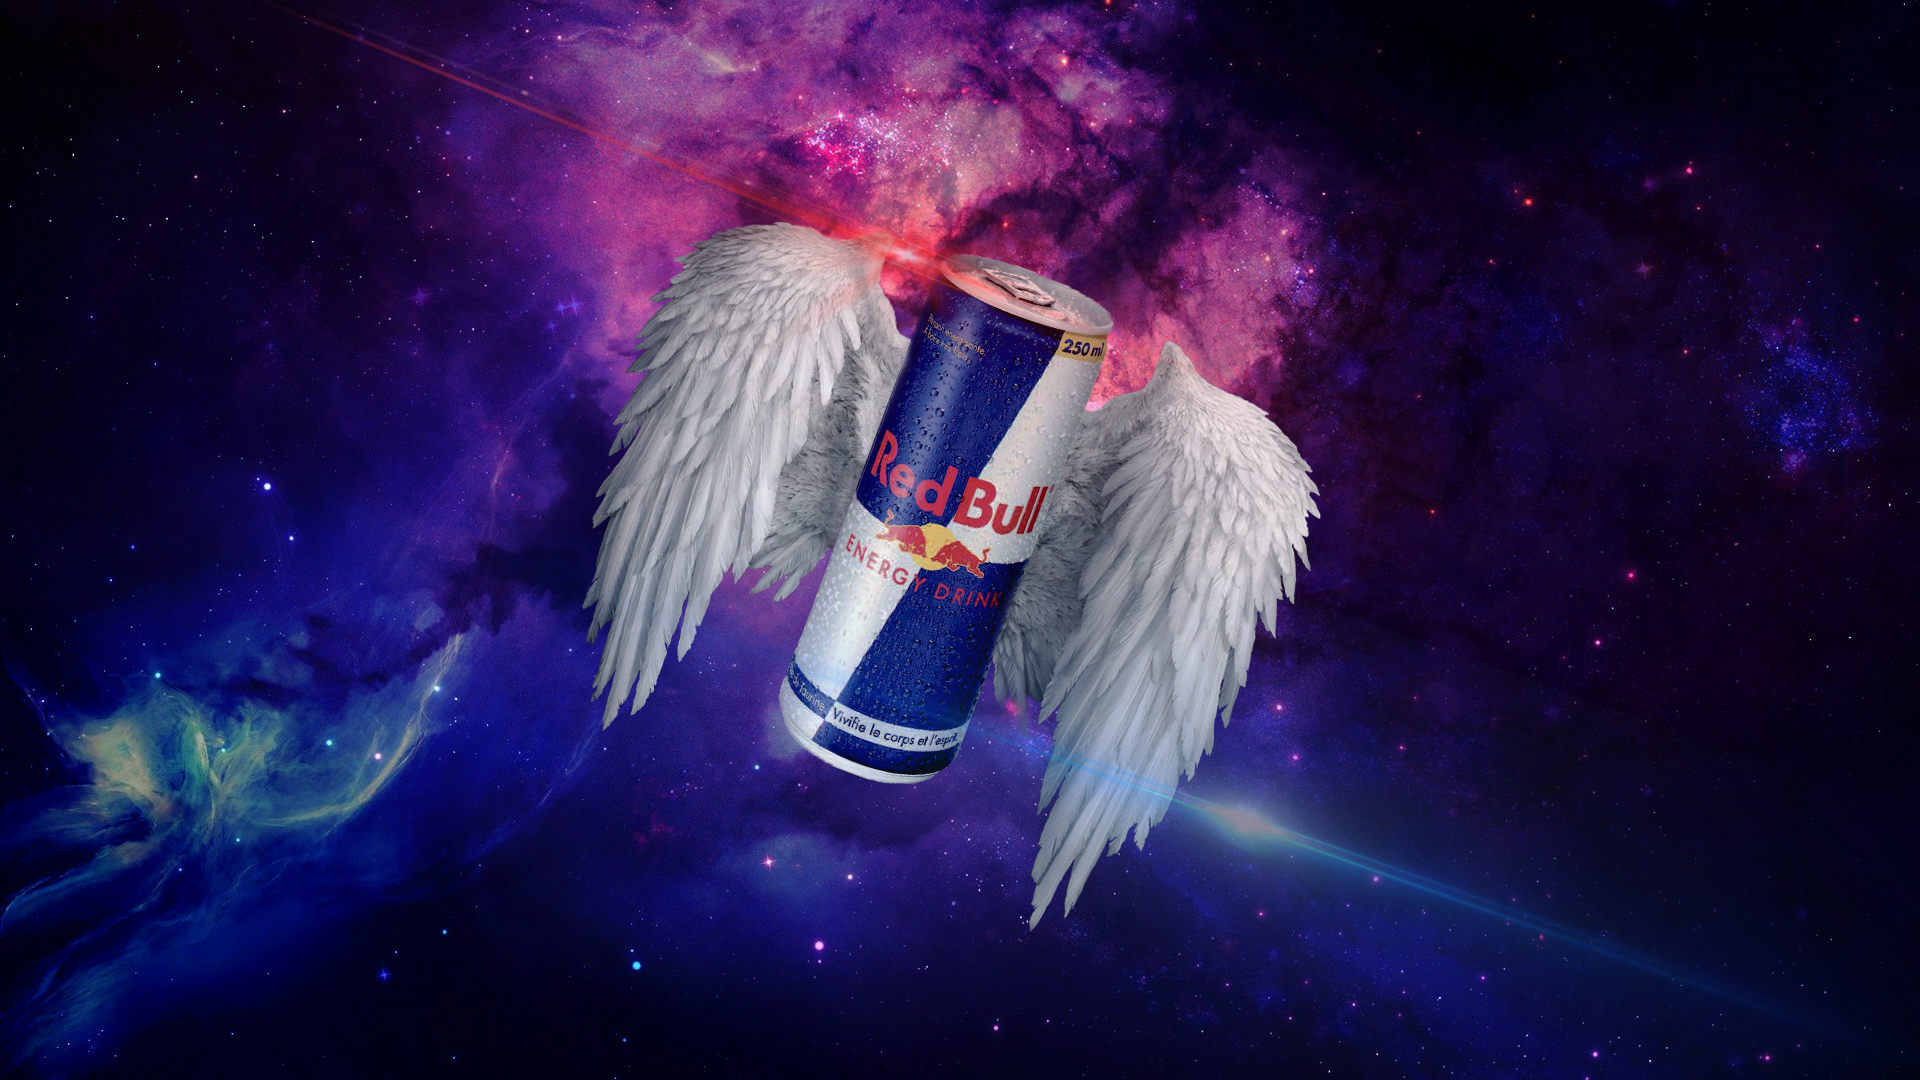 General 1920x1080 Red Bull can energy drinks